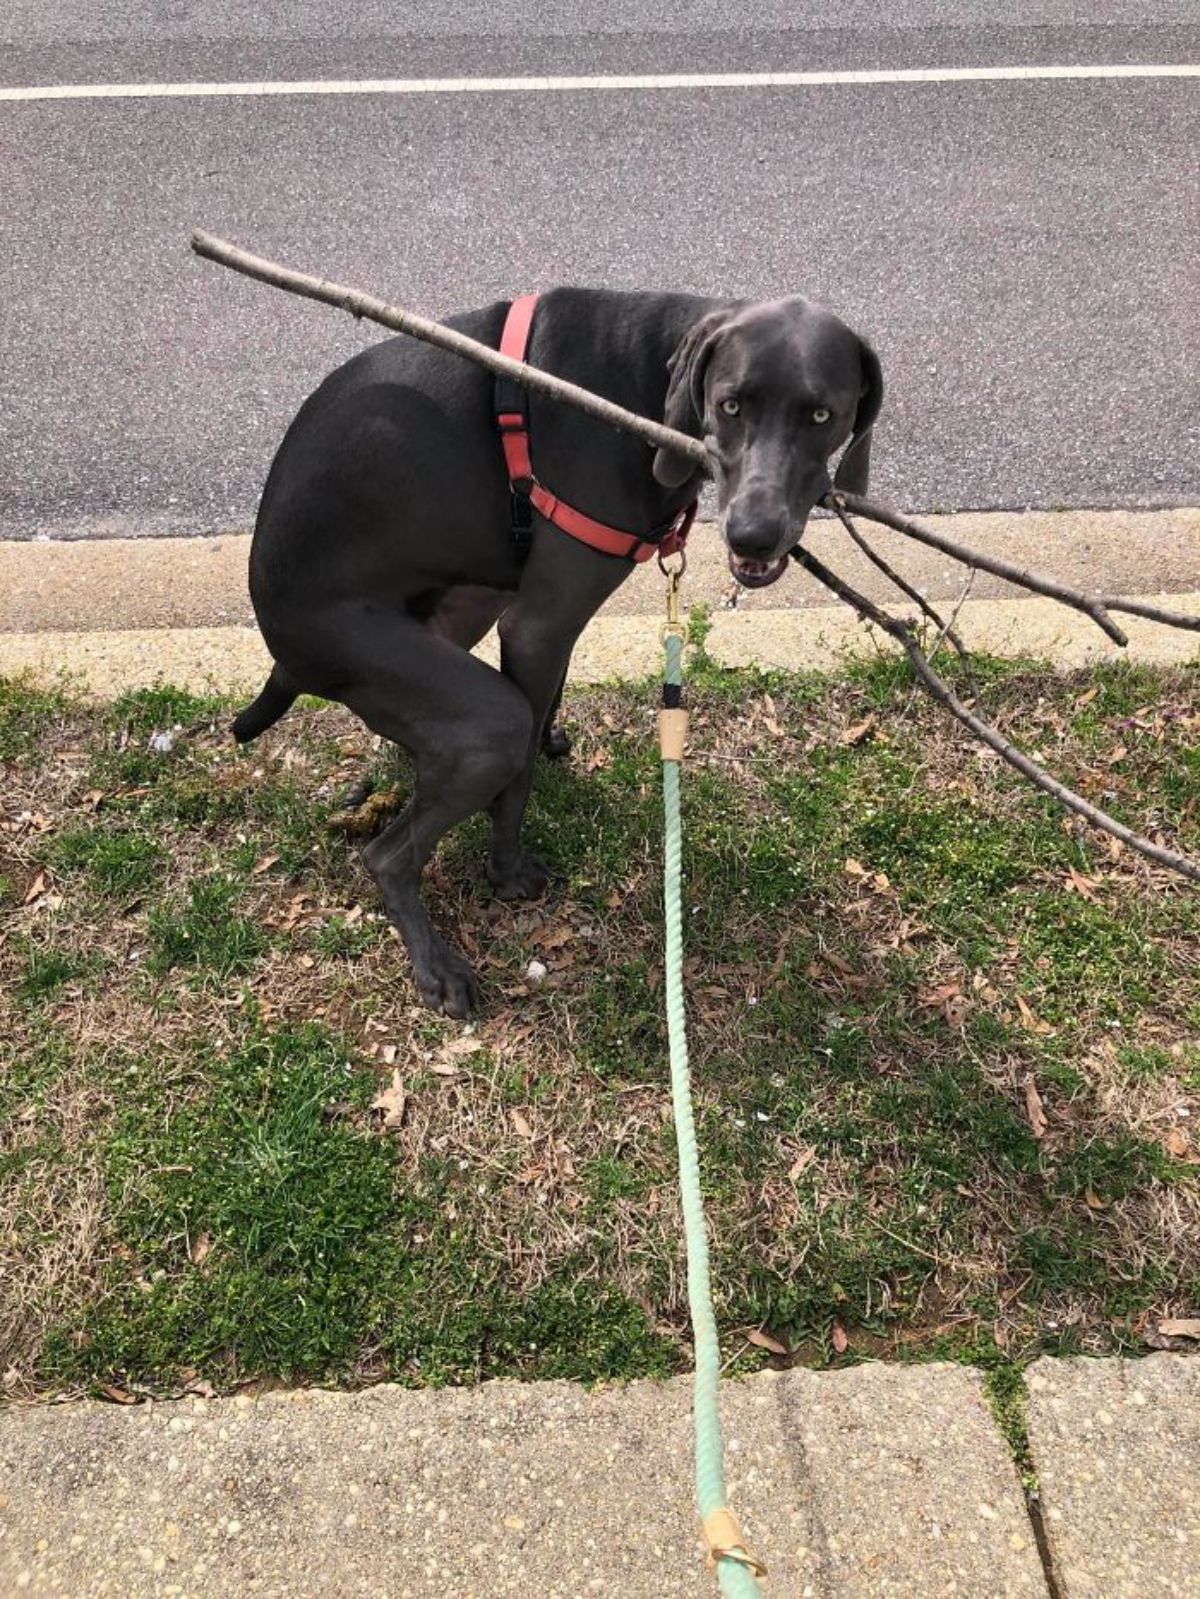 black dog crouching and pooping while holding a long and thin branch